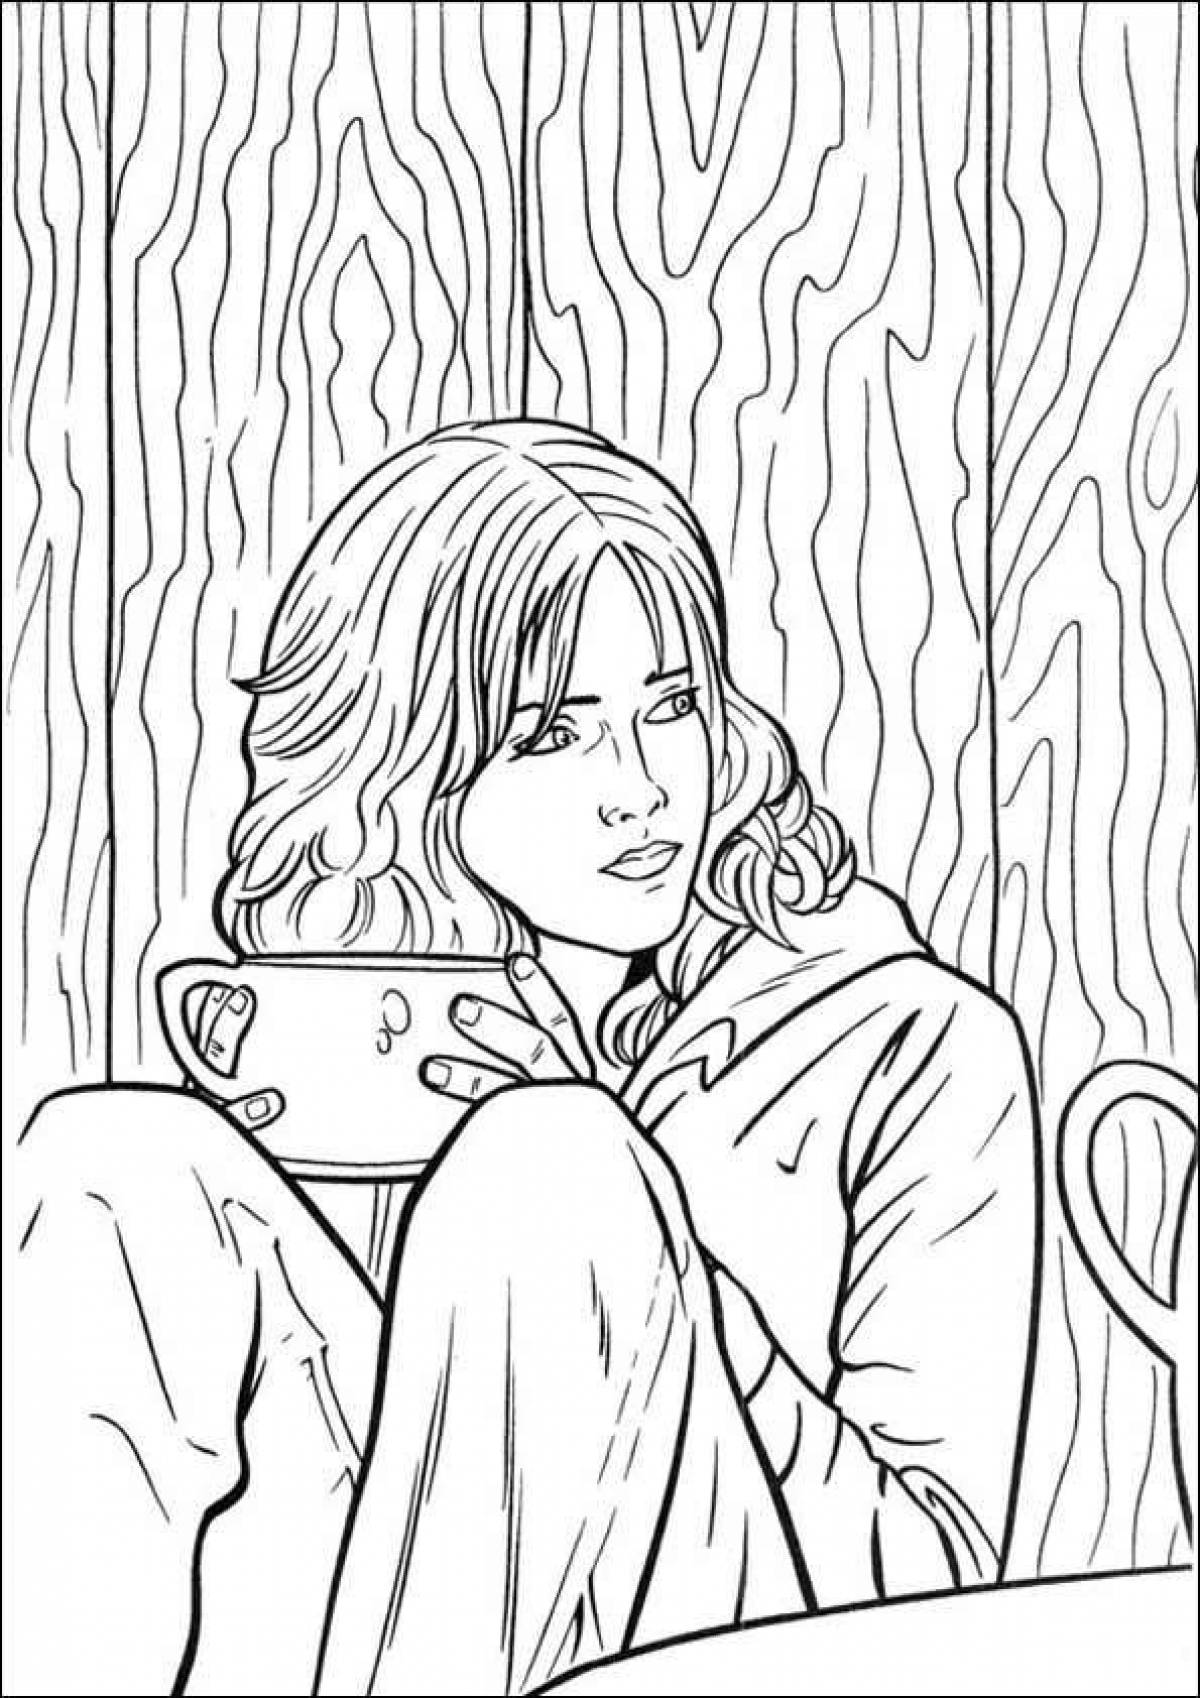 Coloring freaky hermione granger